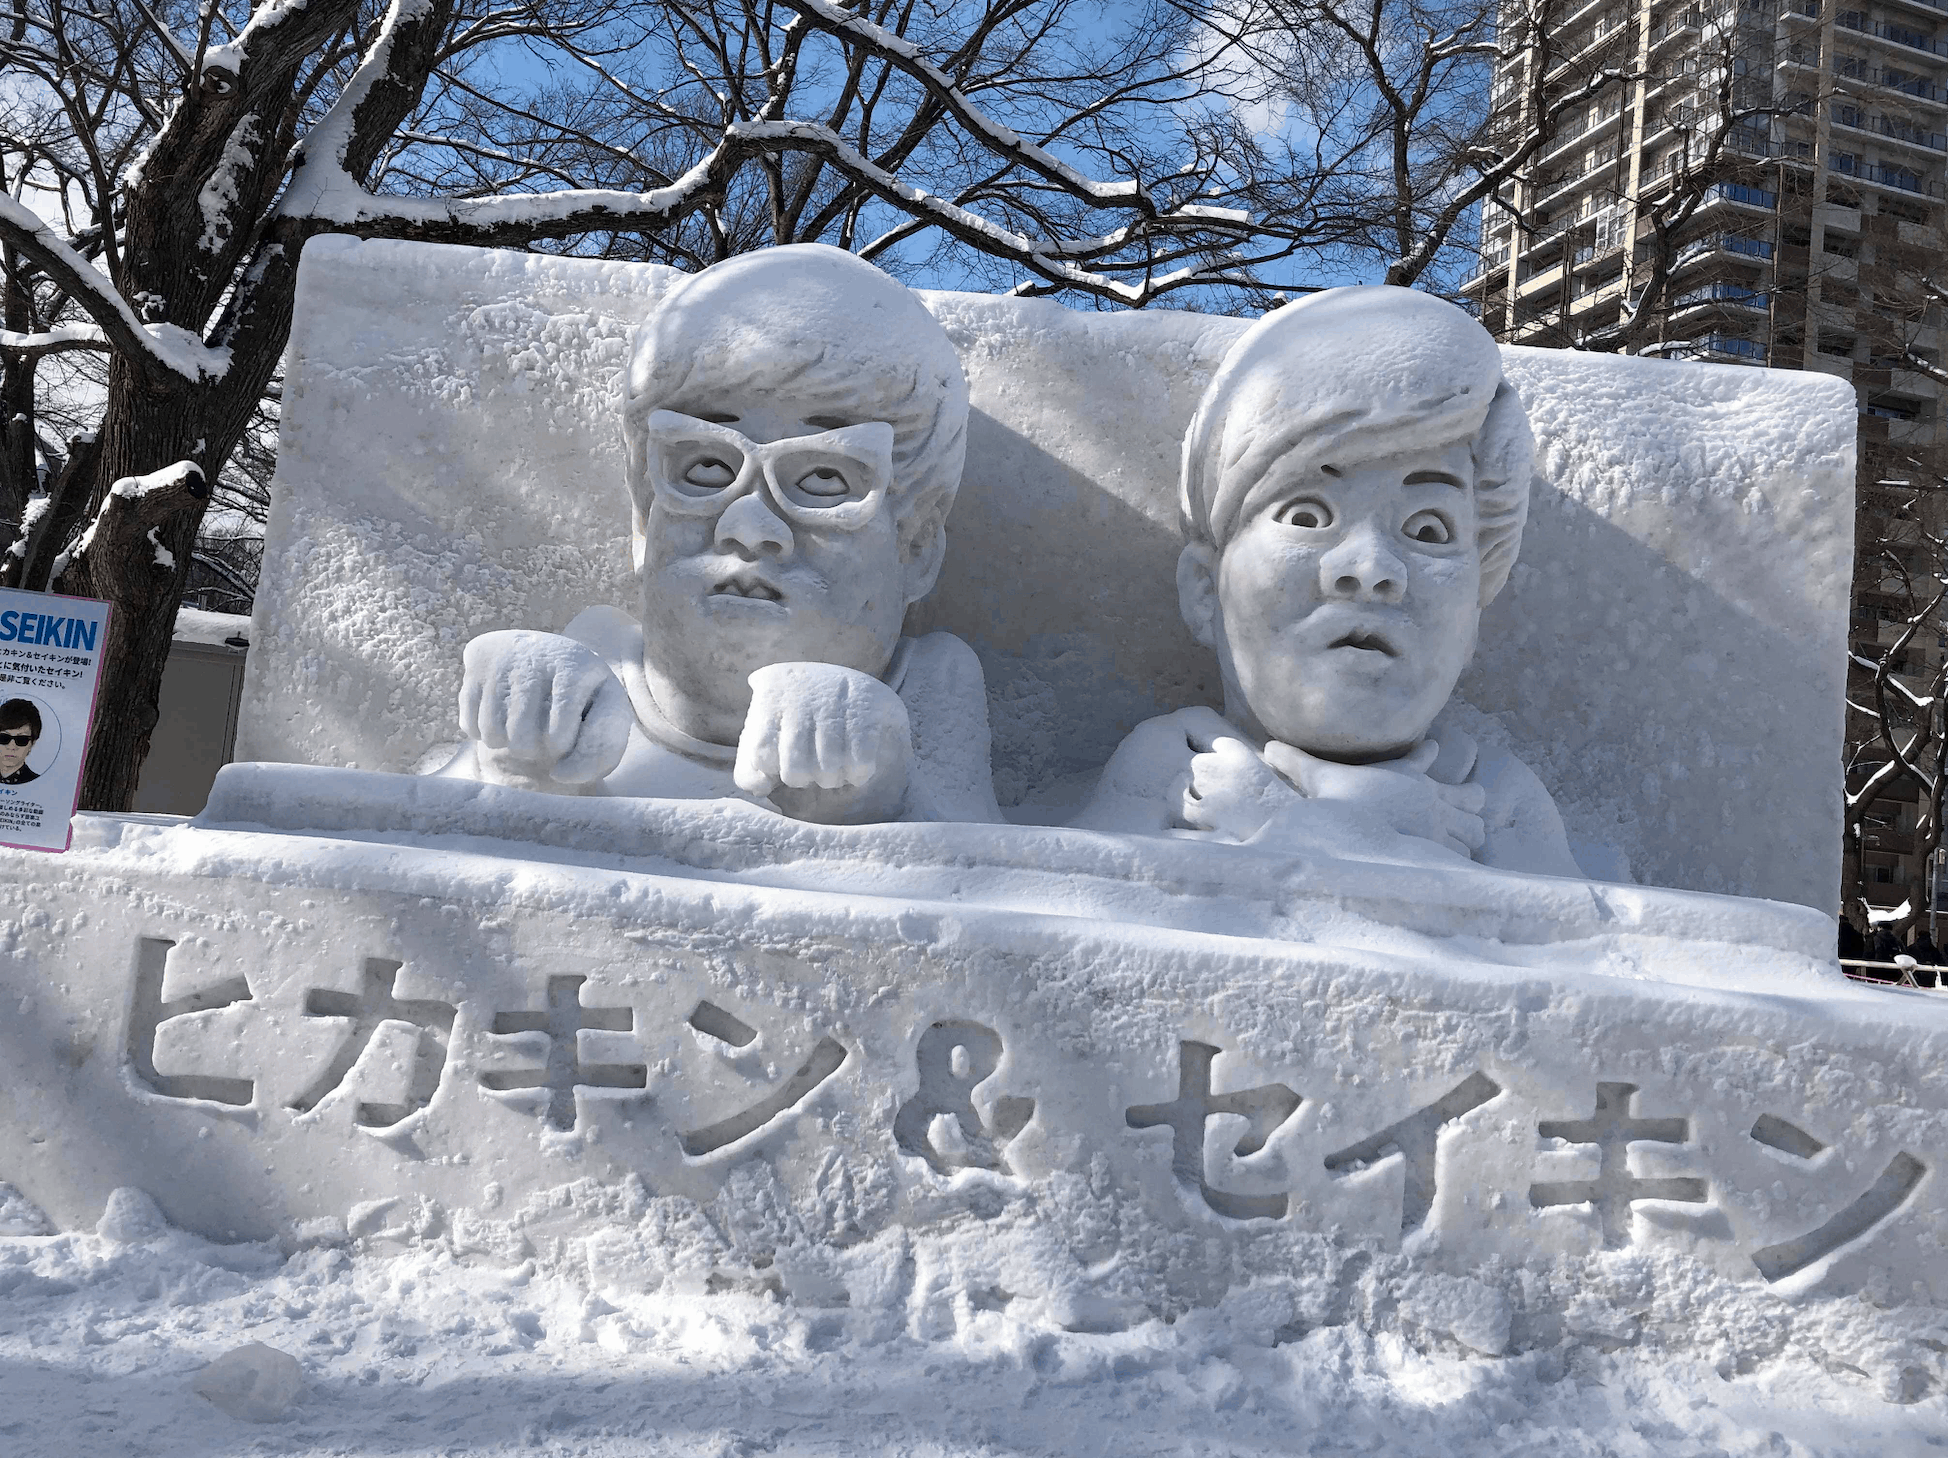 Artists sculpting ice at Sapporo Snow Festival